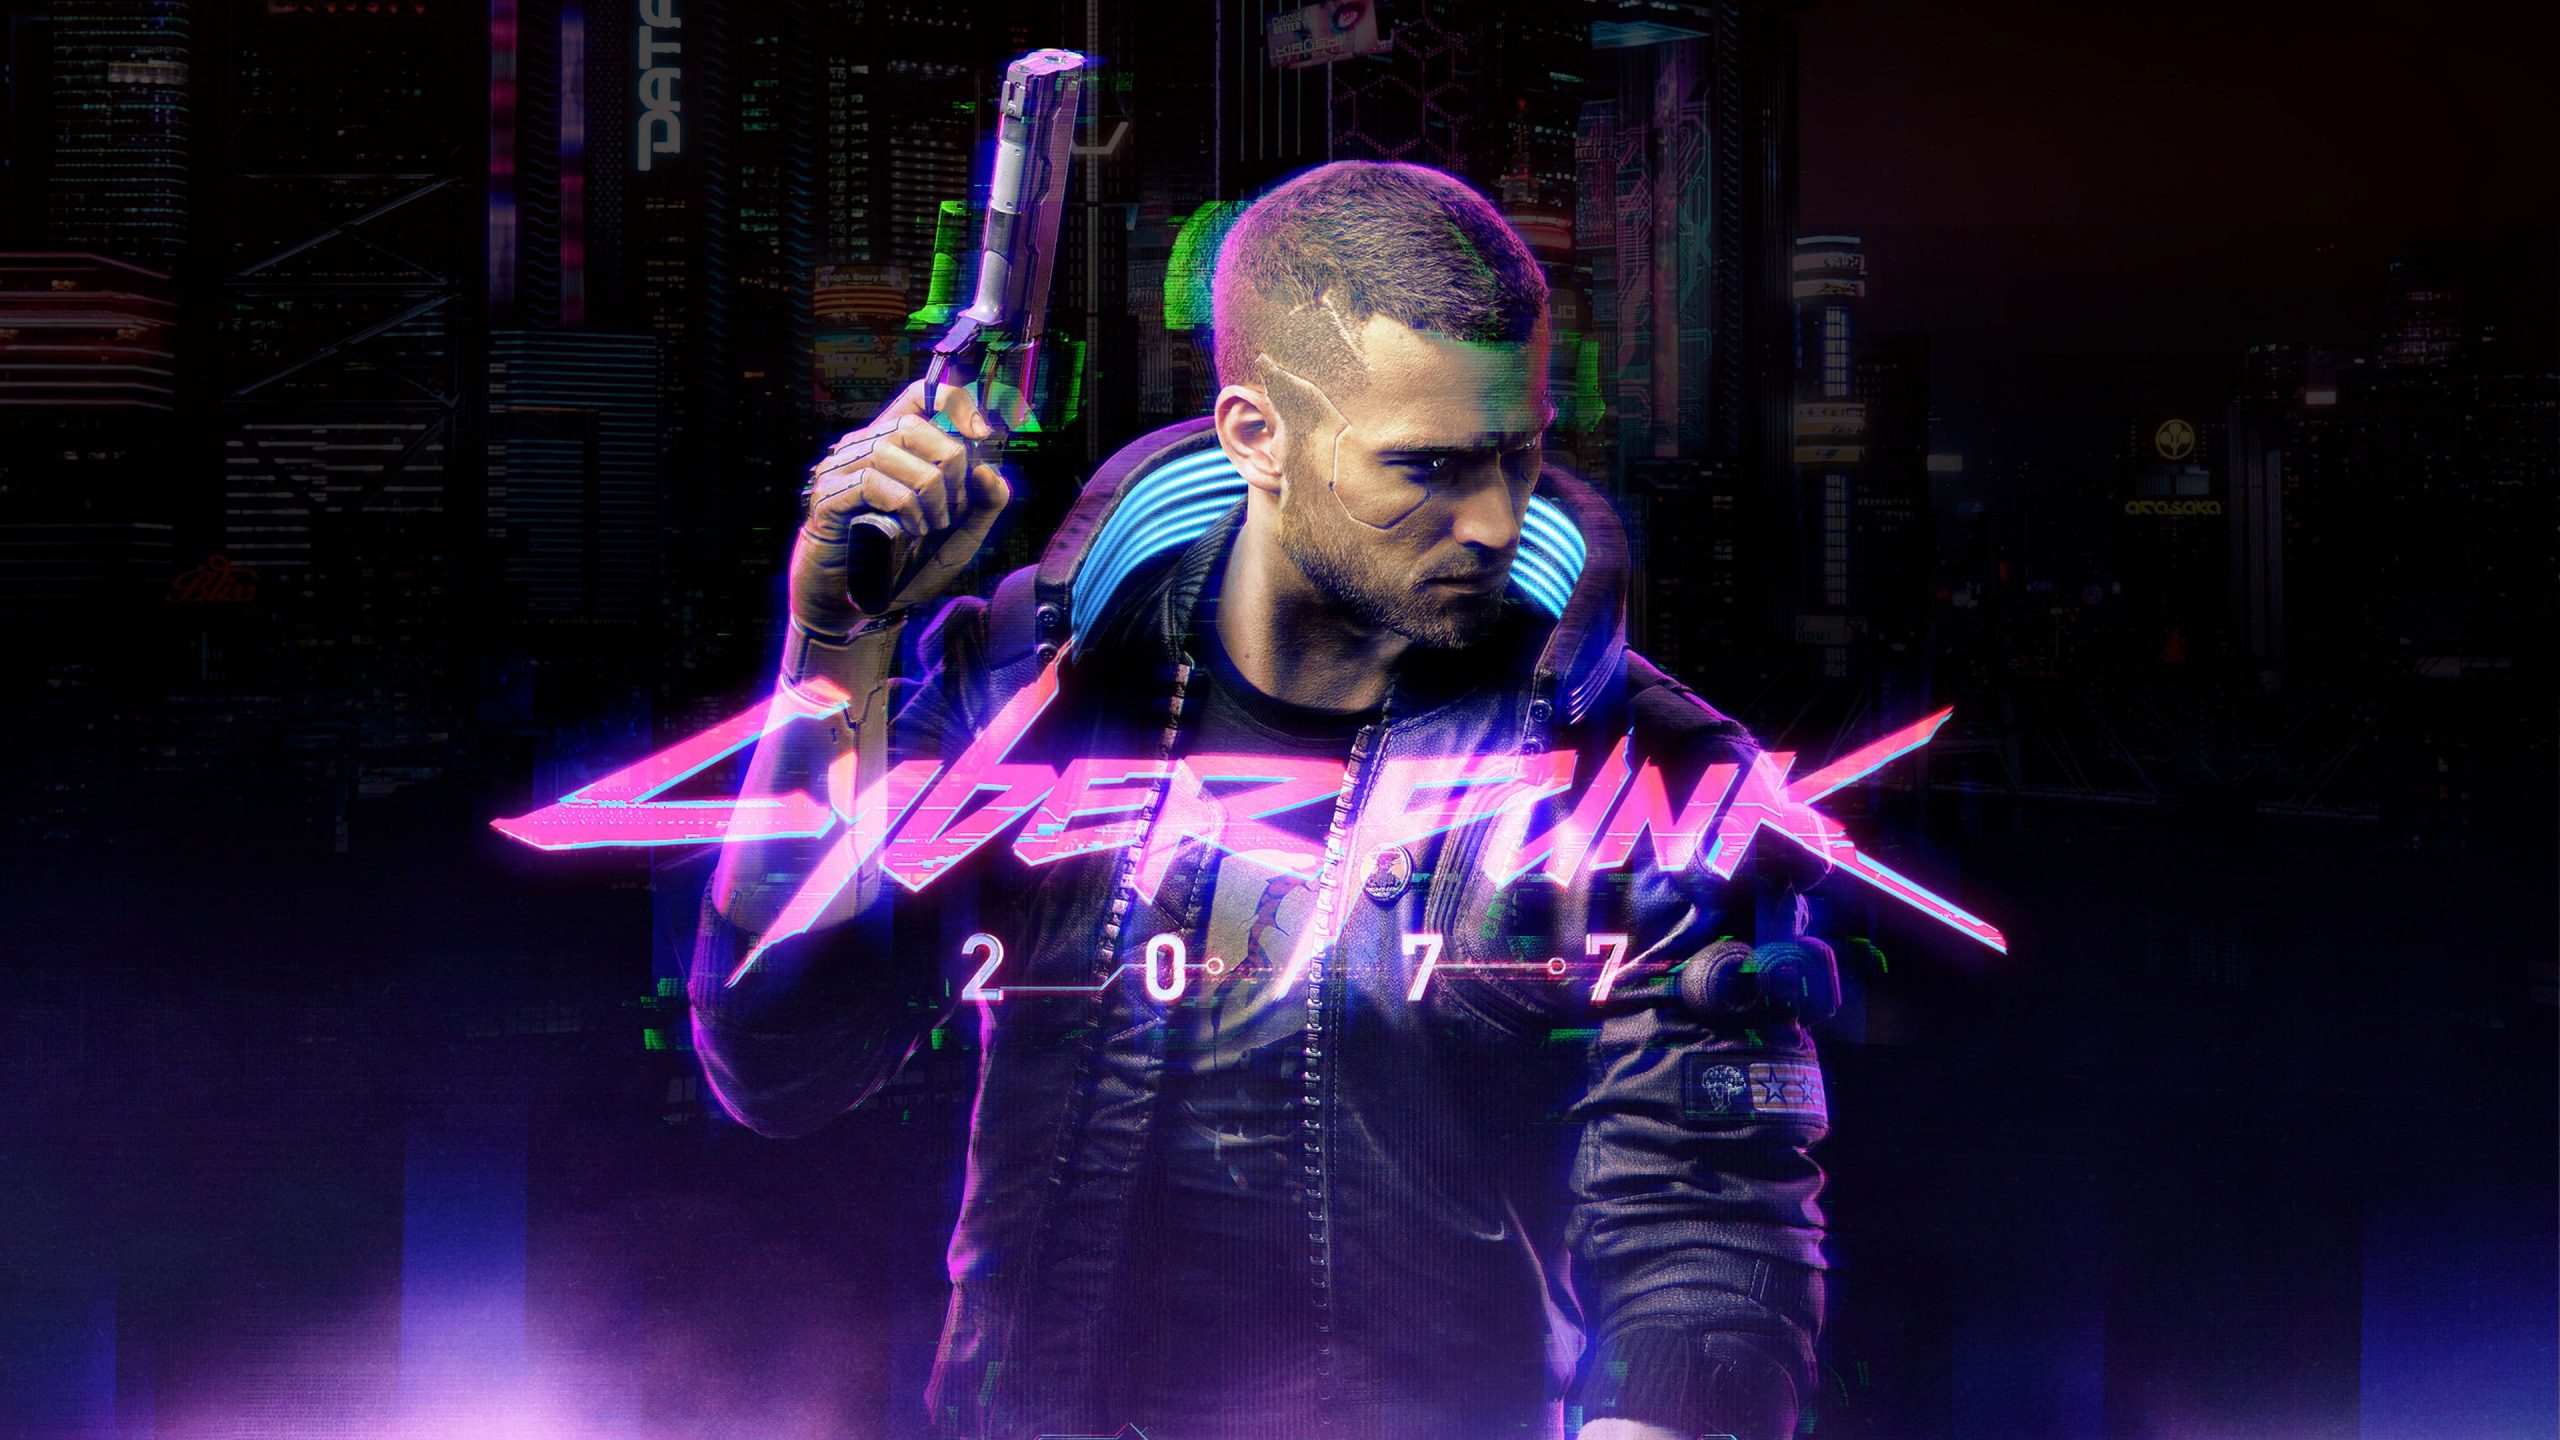 Cyberpunk 2077 wallpaper, video games, video game characters, CD Projekt RED